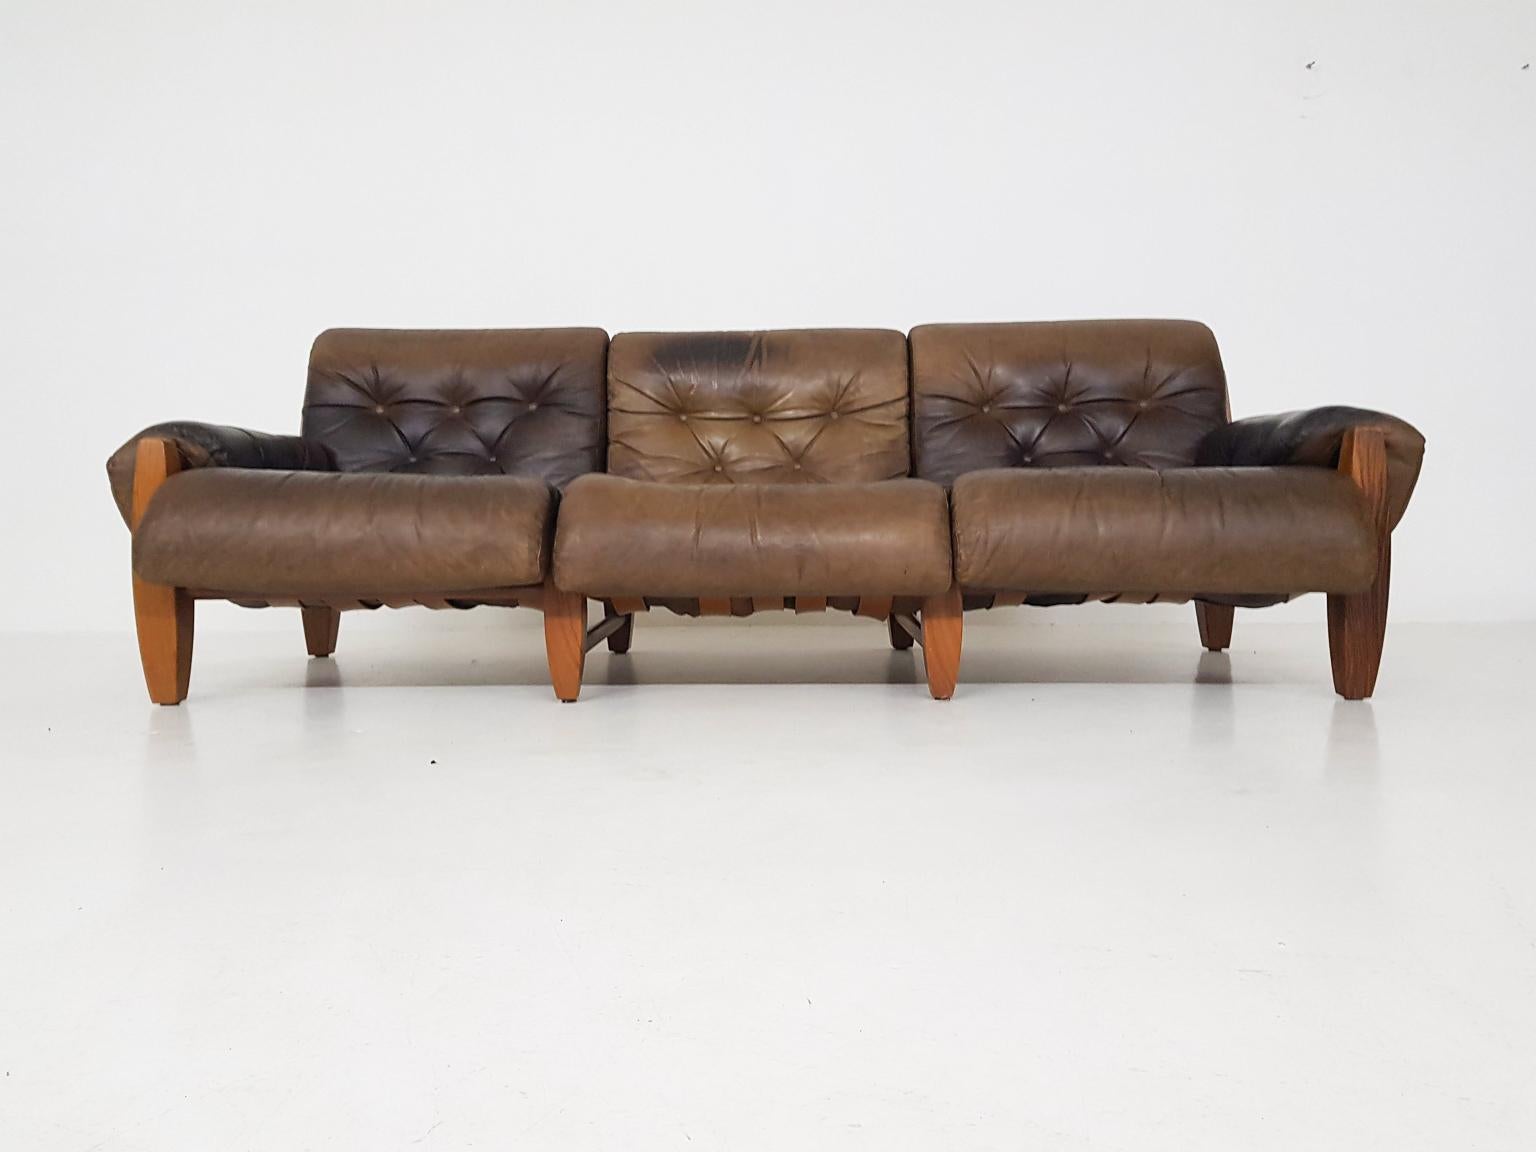 Oak frame and brown leather three-seat sofa attributed to Sergio Rodrigues, Jean Gillon or Percival Lafer.

We haven't found its designer yet, but we think it has Brazilian roots. The wooden frame, leather straps and the large hanging leather